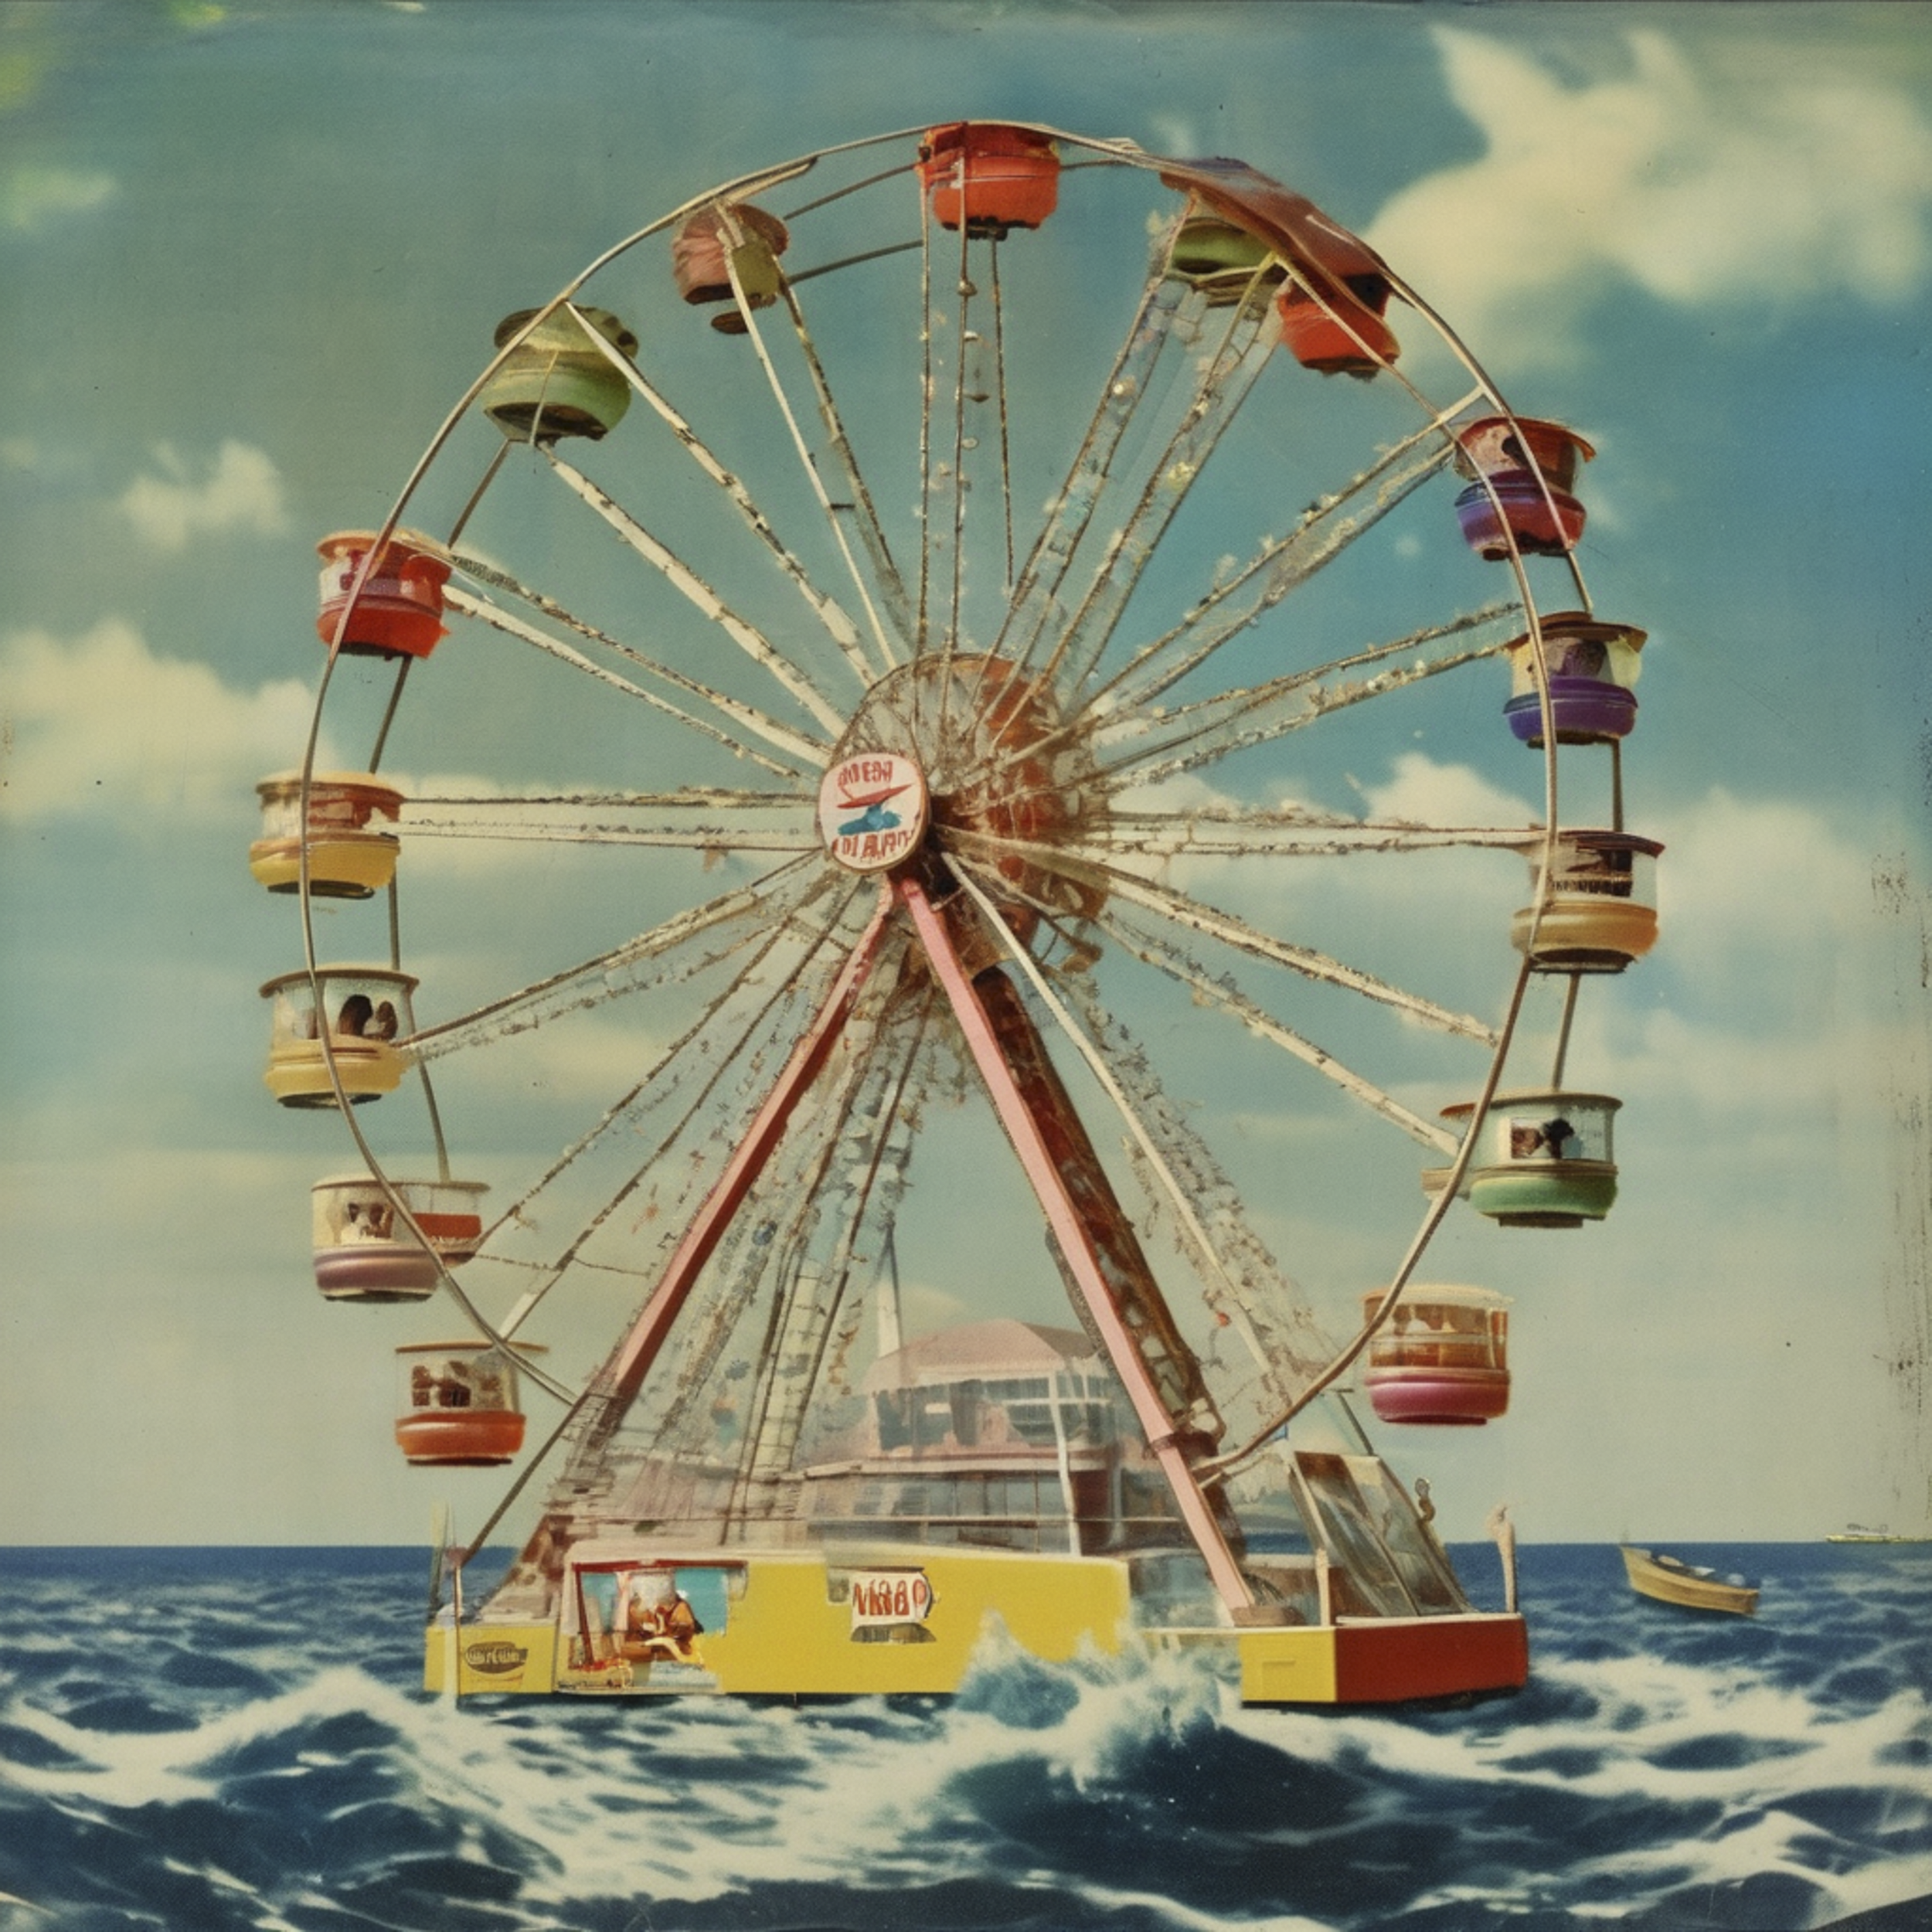 Ferris Wheel - Complicit Complacent-HEYDT-2024-AiAssemblage-40x40in-1.png